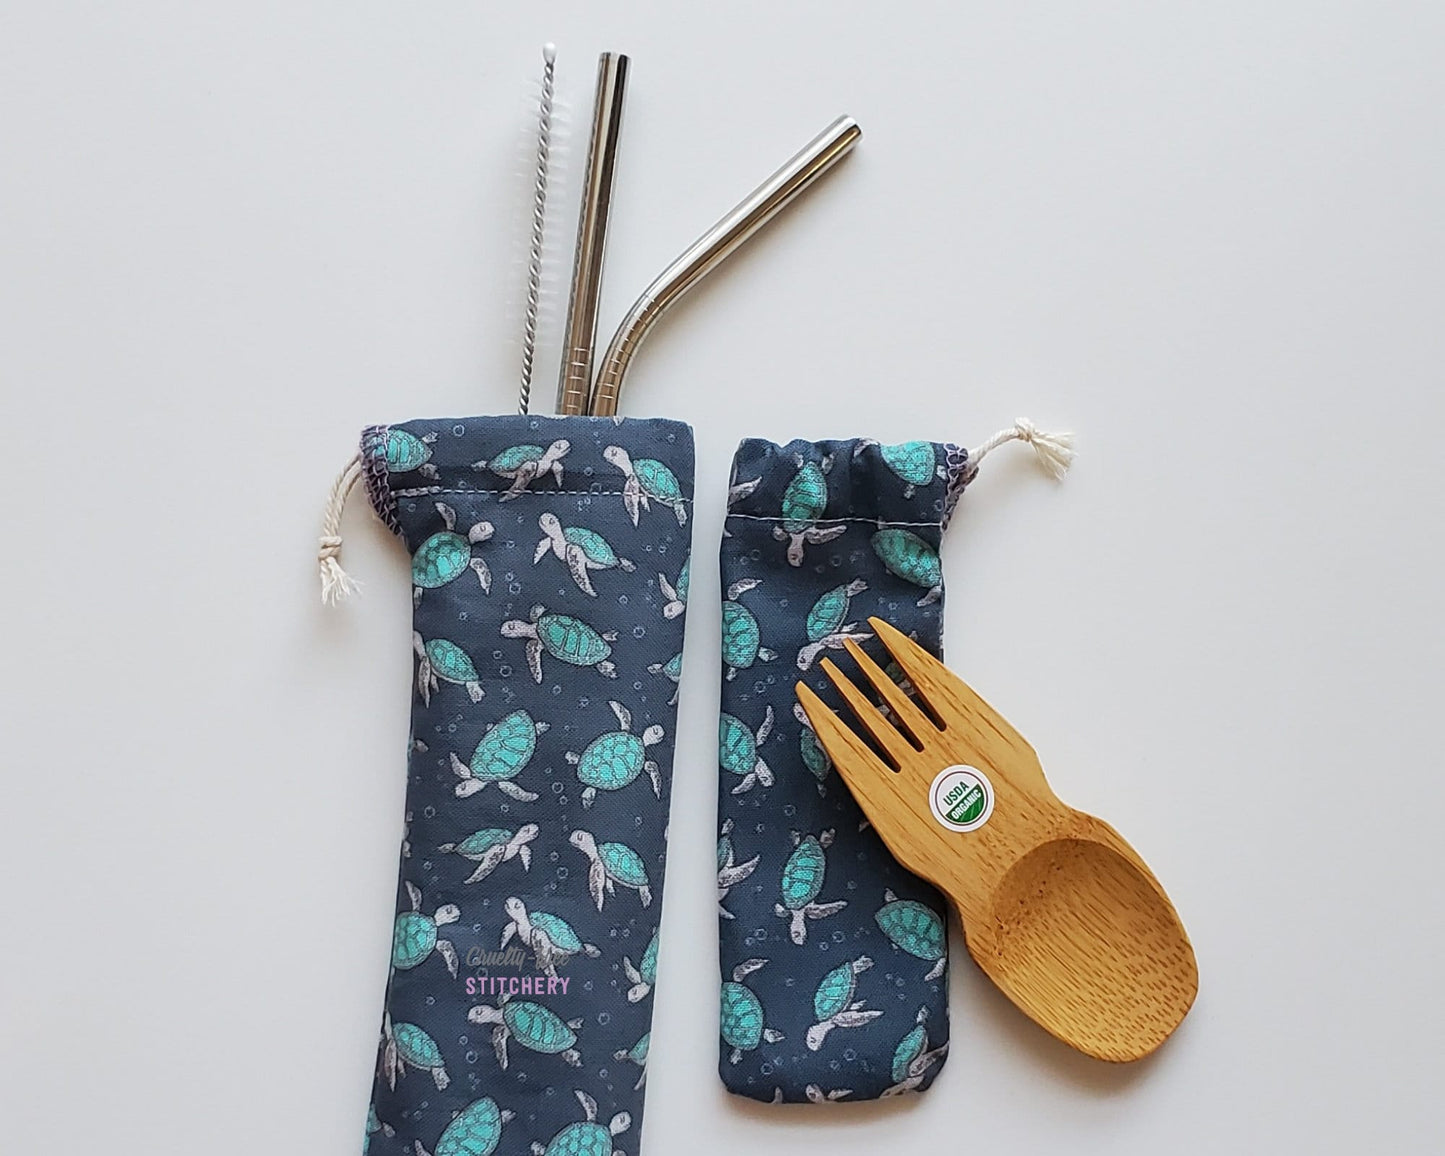 Reusable bamboo spork and stainless steel straw pouch set. The pouches are both dark navy blue with tiny sea turtles printed on the fabric.